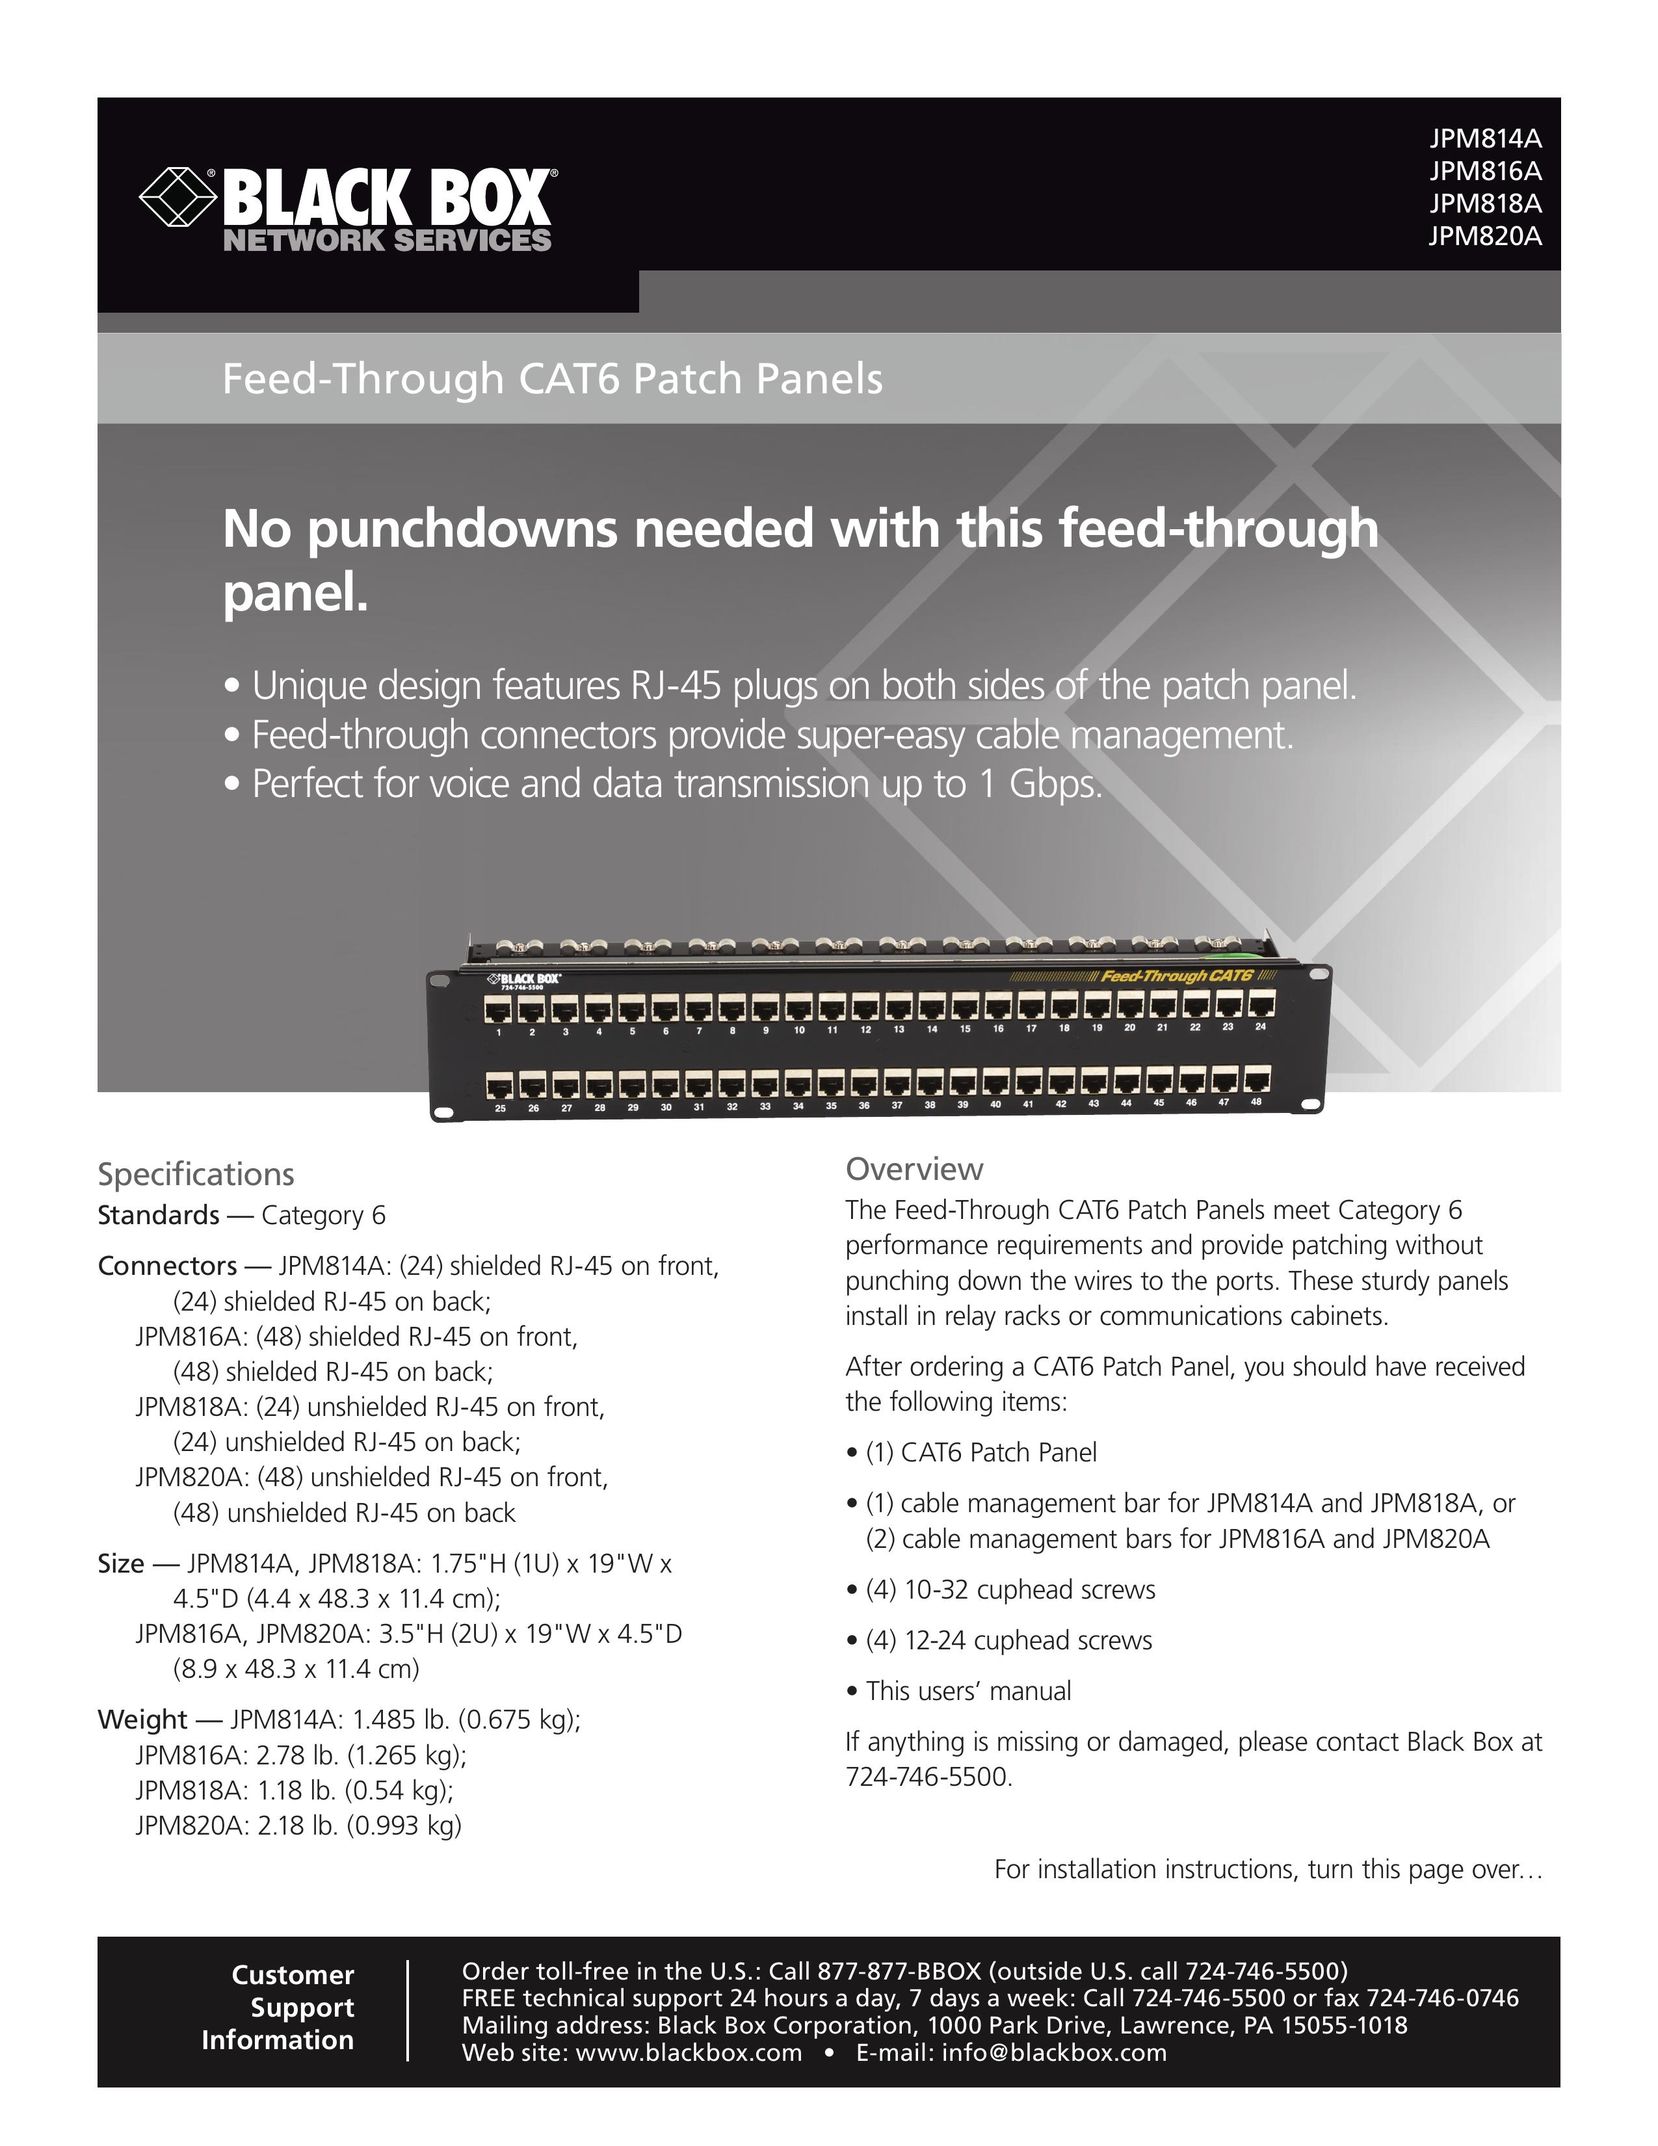 Black Box Black Box Network Services Feed-Through CAT6 Patch Panel Computer Hardware User Manual